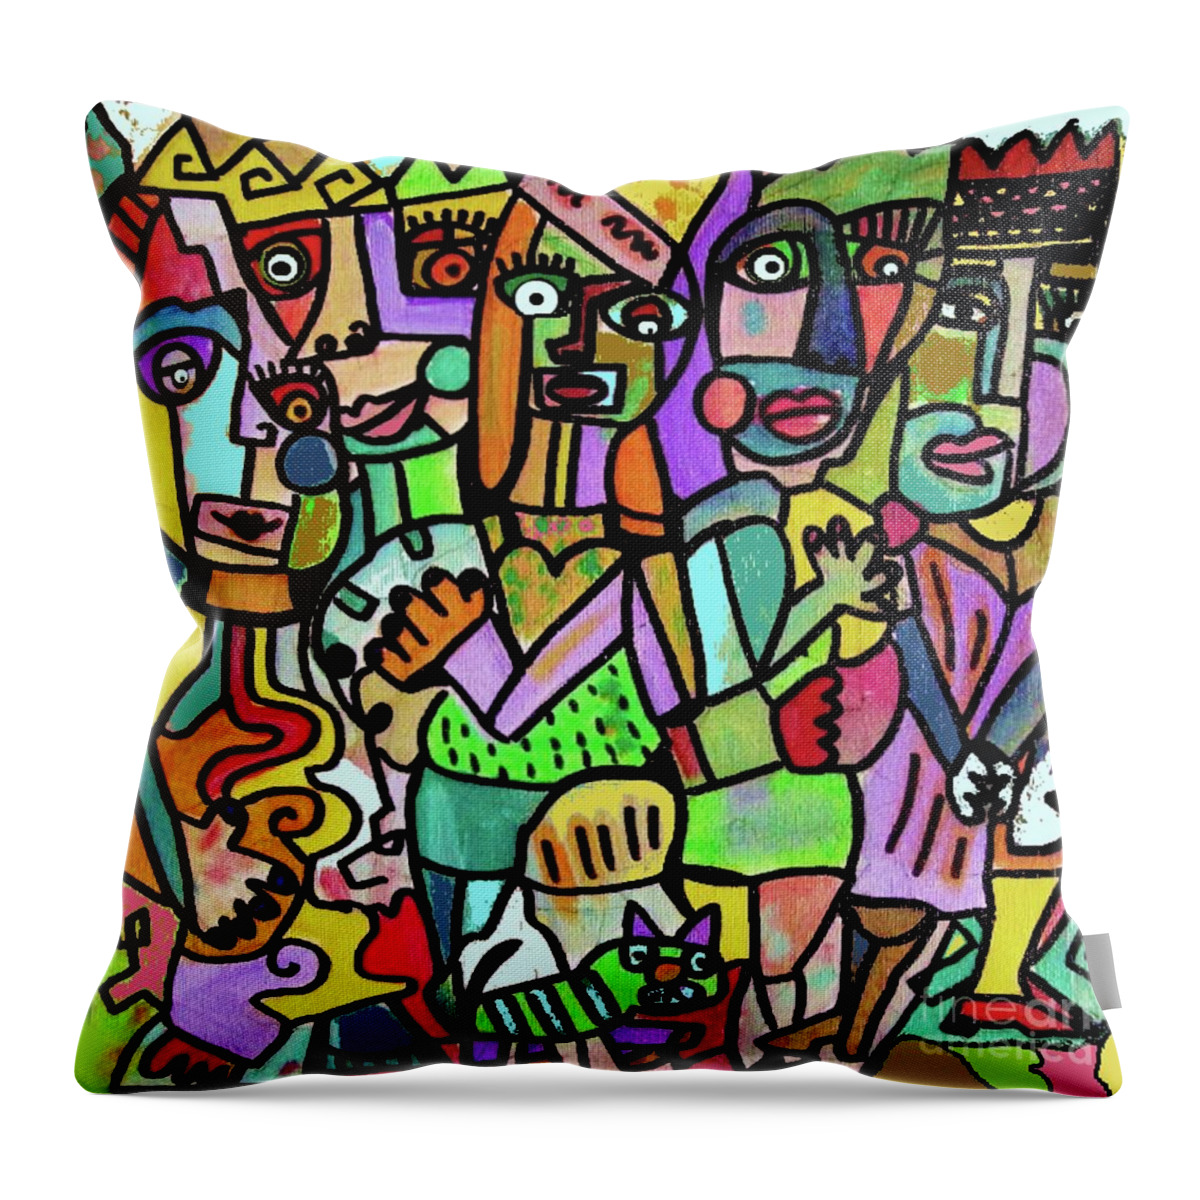 Sandra Silberzweig Throw Pillow featuring the painting Tangled Lonely Hearts by Sandra Silberzweig